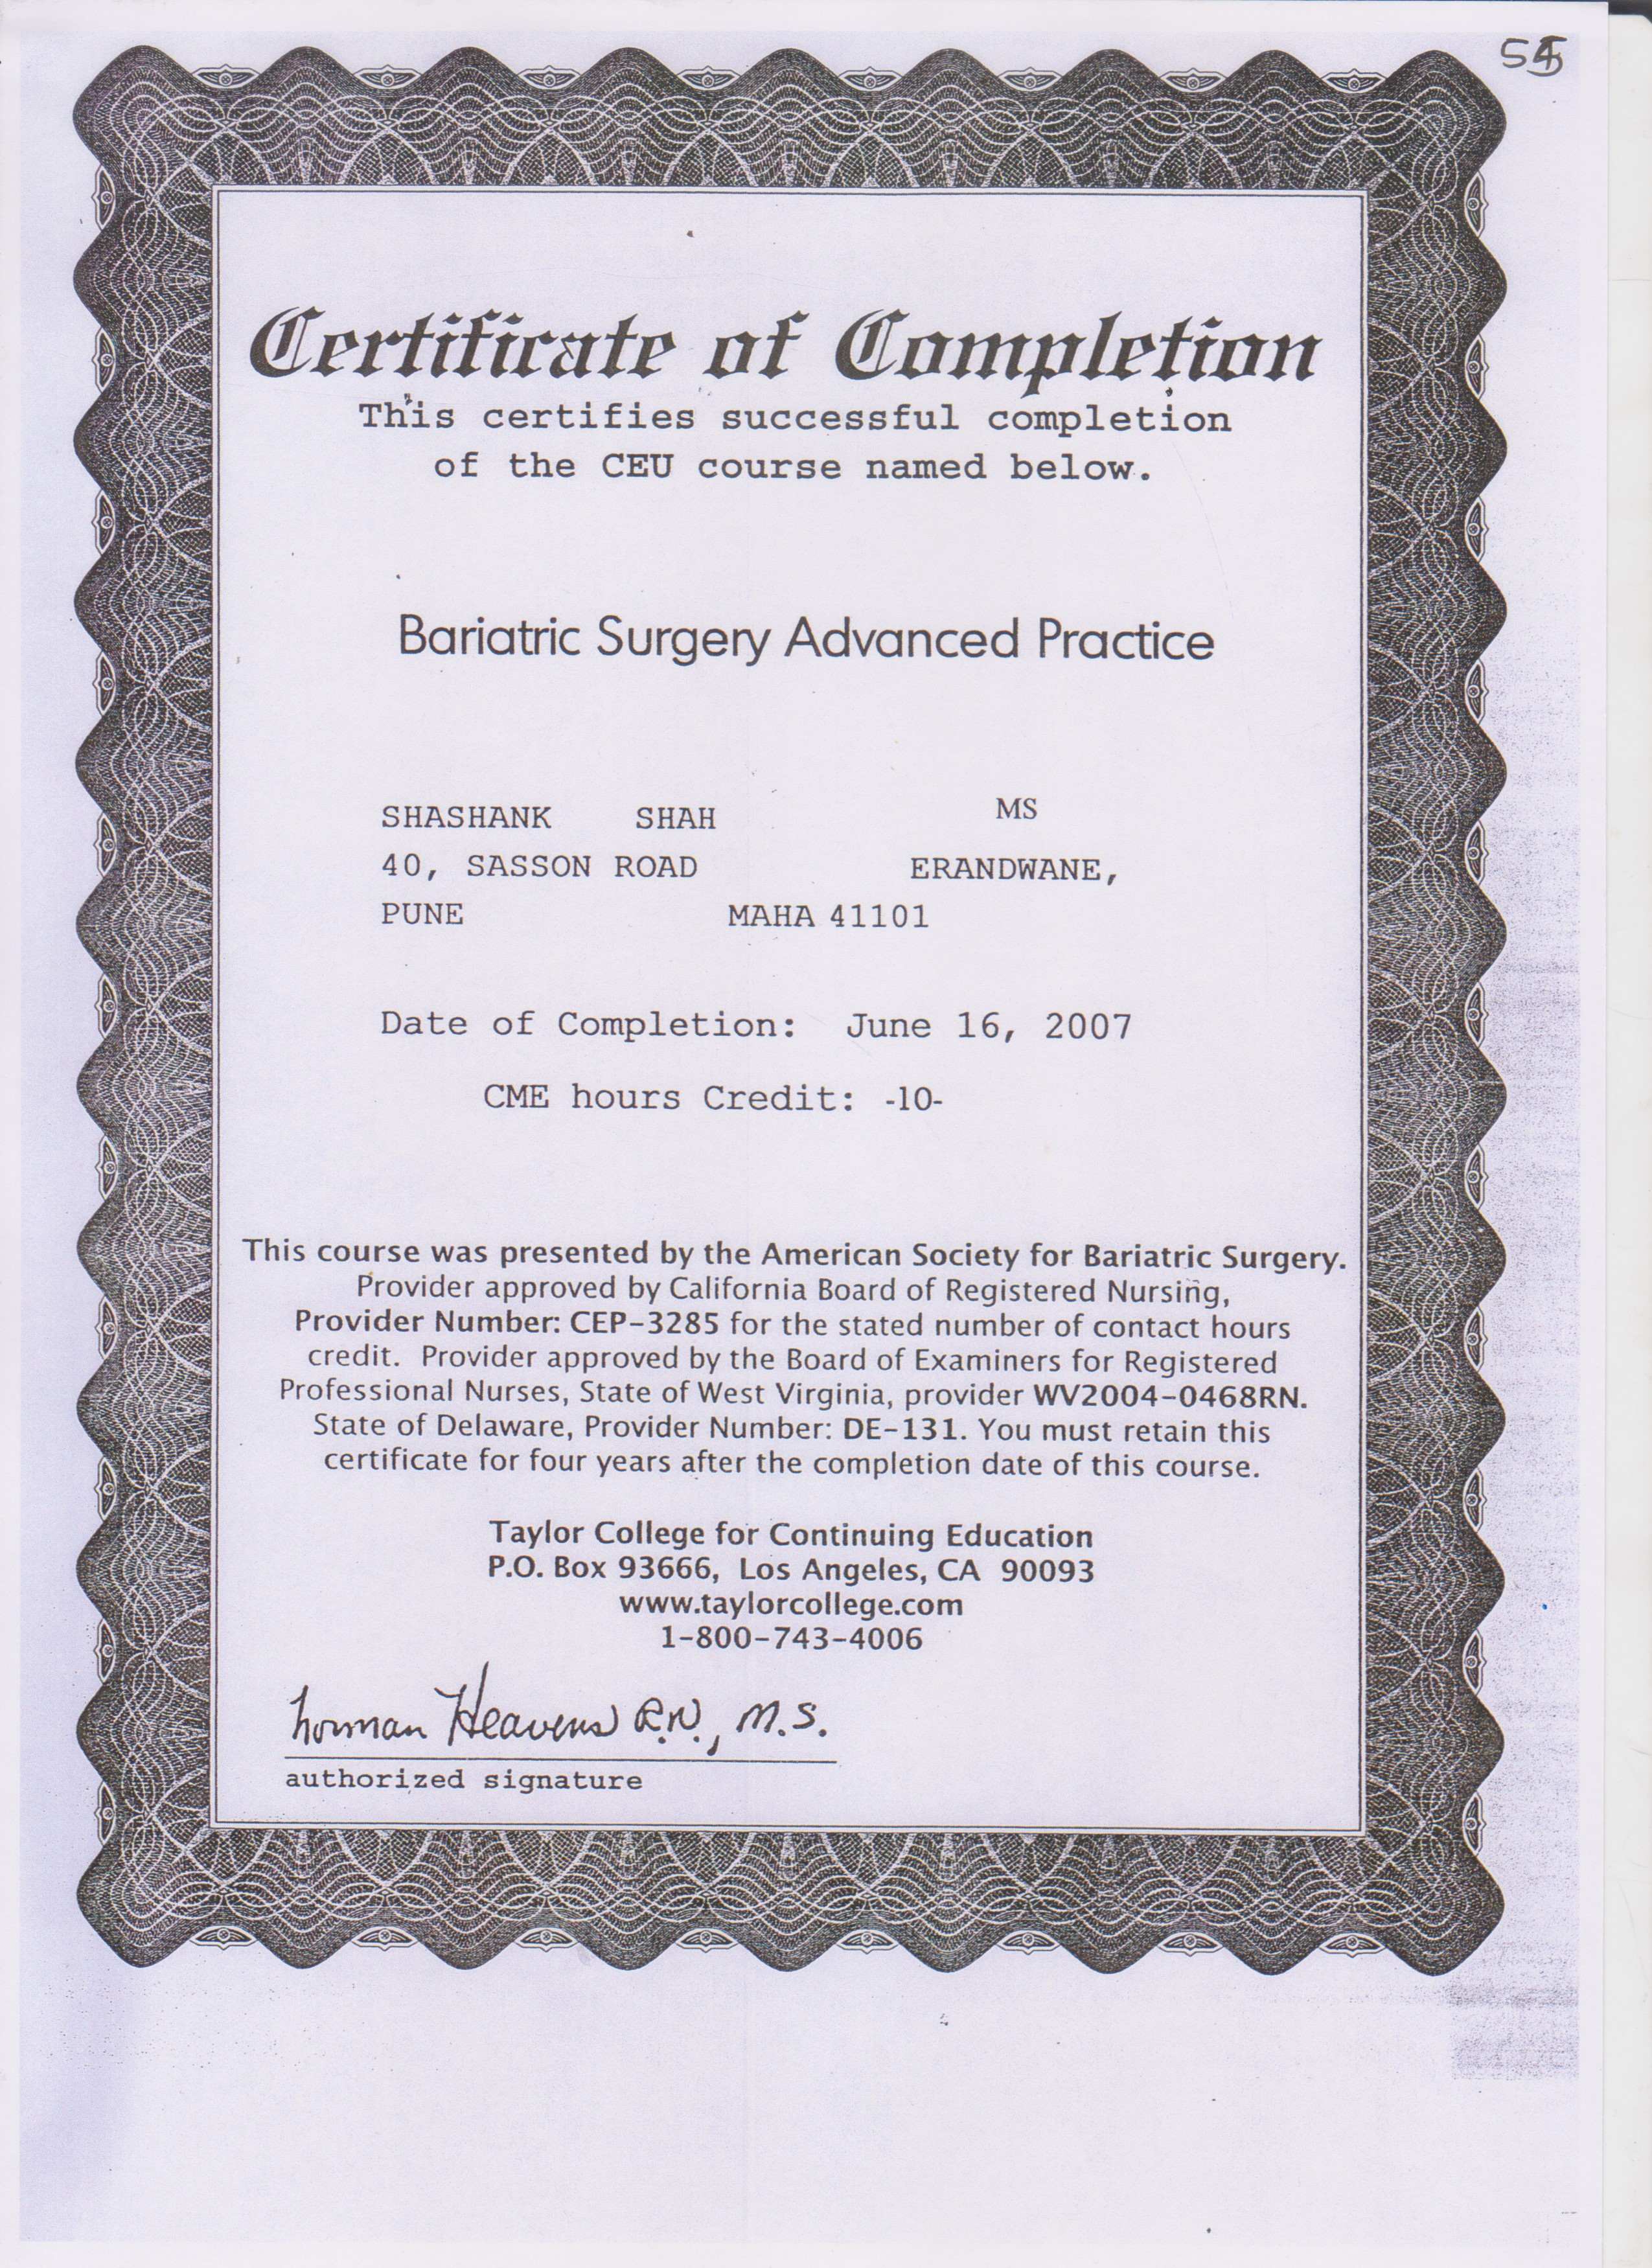 Certificate of Completion of course in Bariatric Surgery Advanced Practice at the Taylor College of Continuing Education in Los Angeles, California in 2007 by Dr Shashank Shah. 